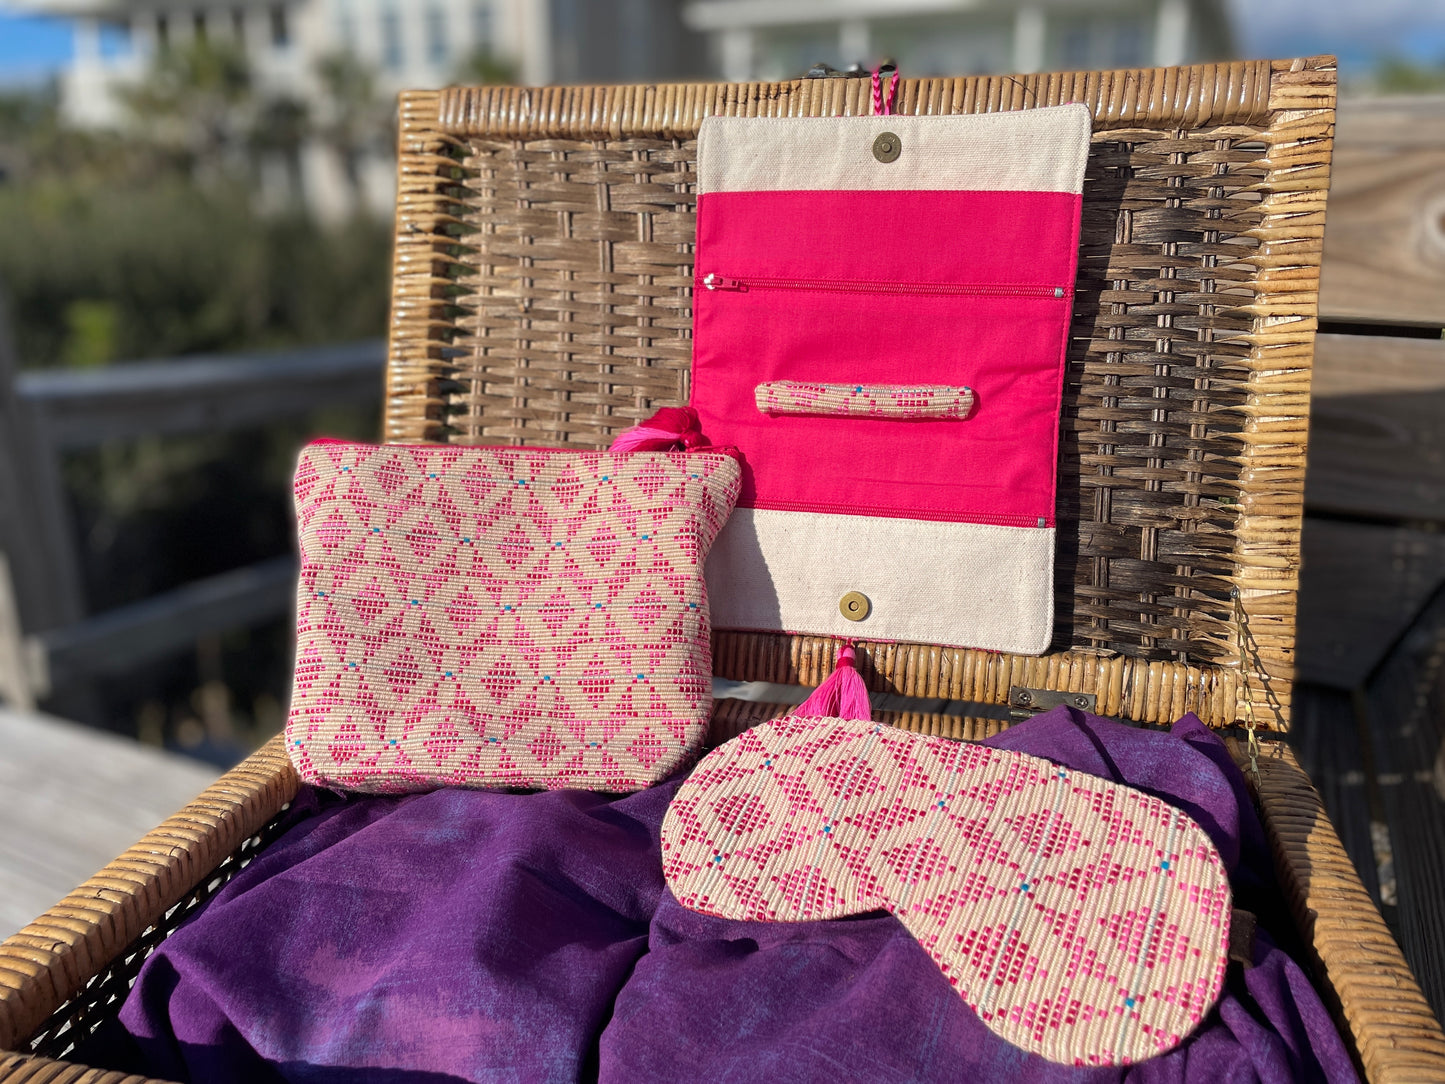 The "Weekender" Travel Accessory Trio with Cosmetic Bag, Jewelry Clutch, and Silky Eye Mask